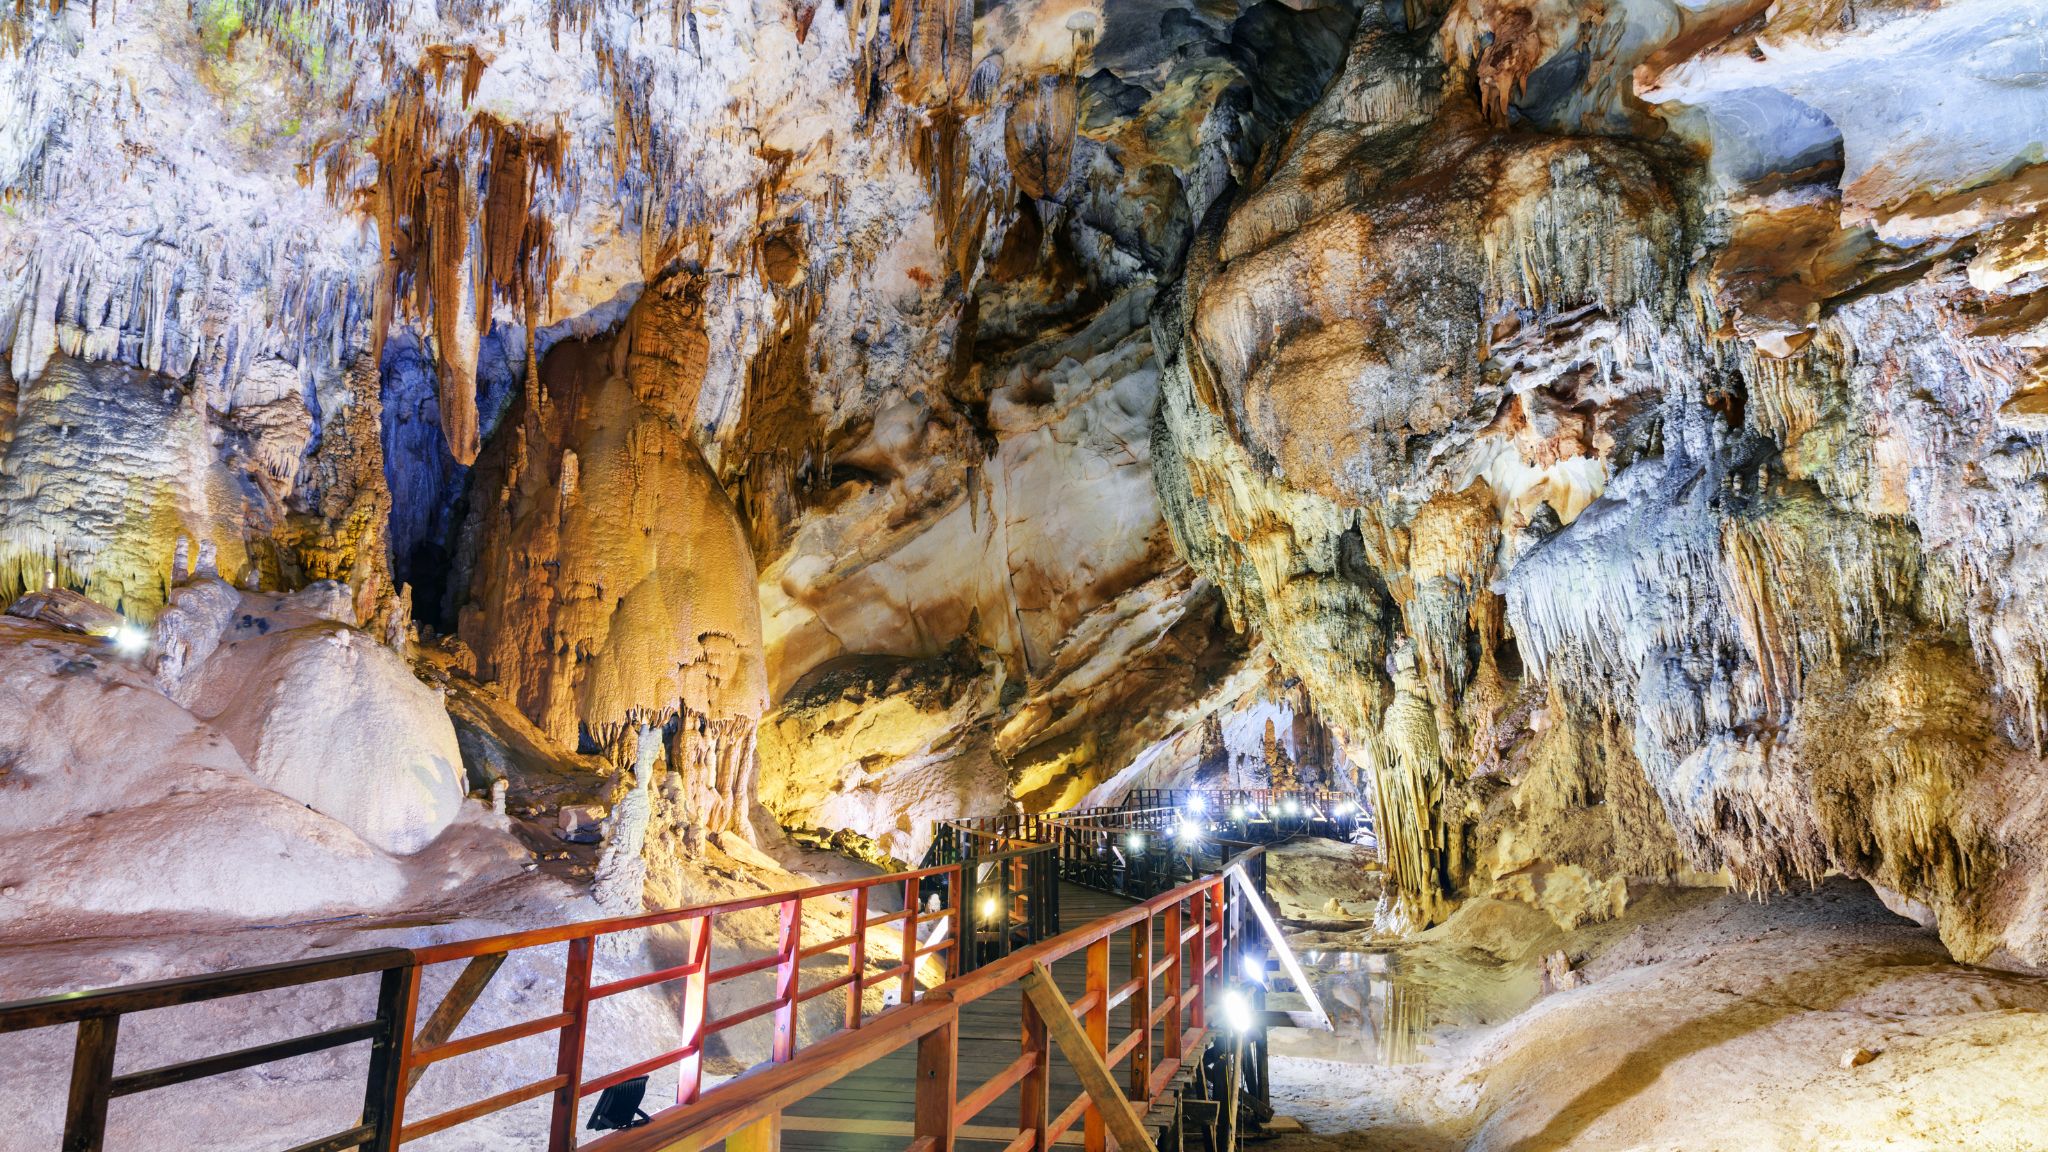 Day 2 Marvel At The Breathtaking Beauty Of Paradise Cave